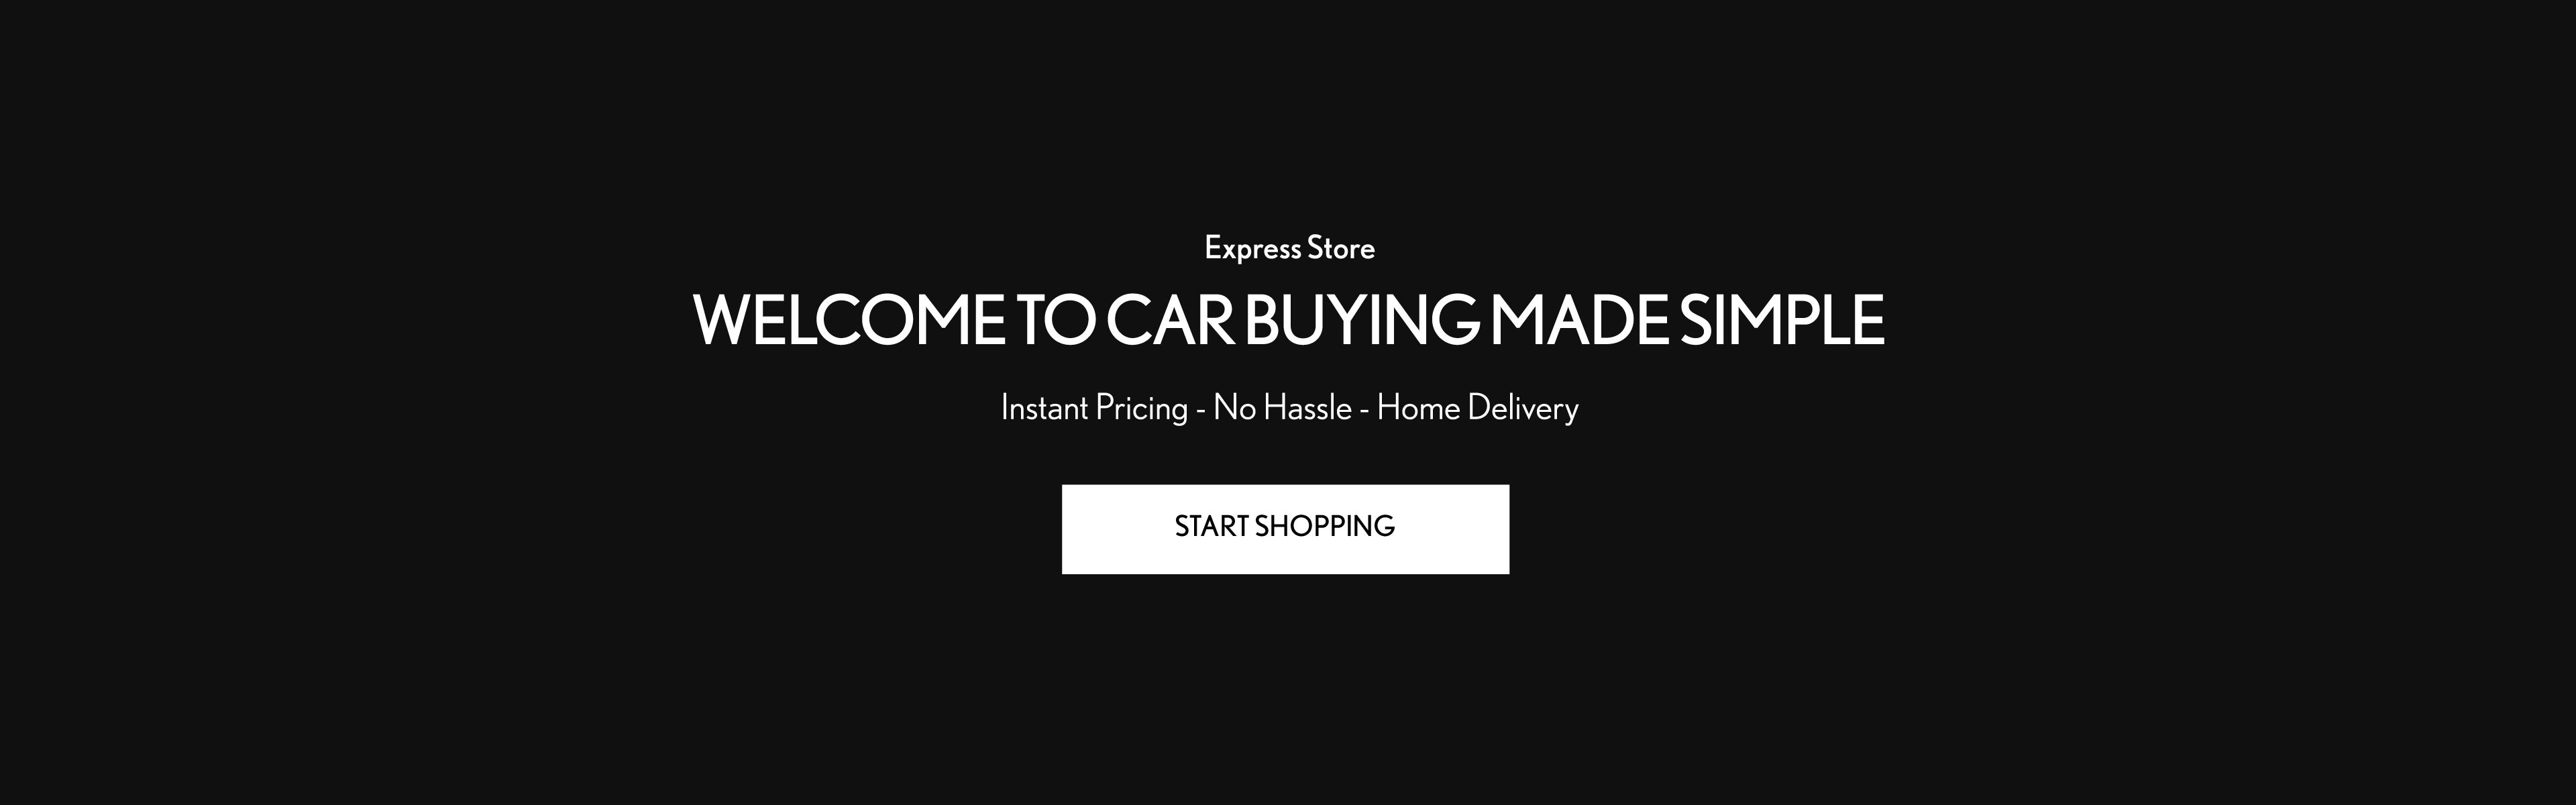 WELCOME TO CAR BUYING MADE SIMPLE